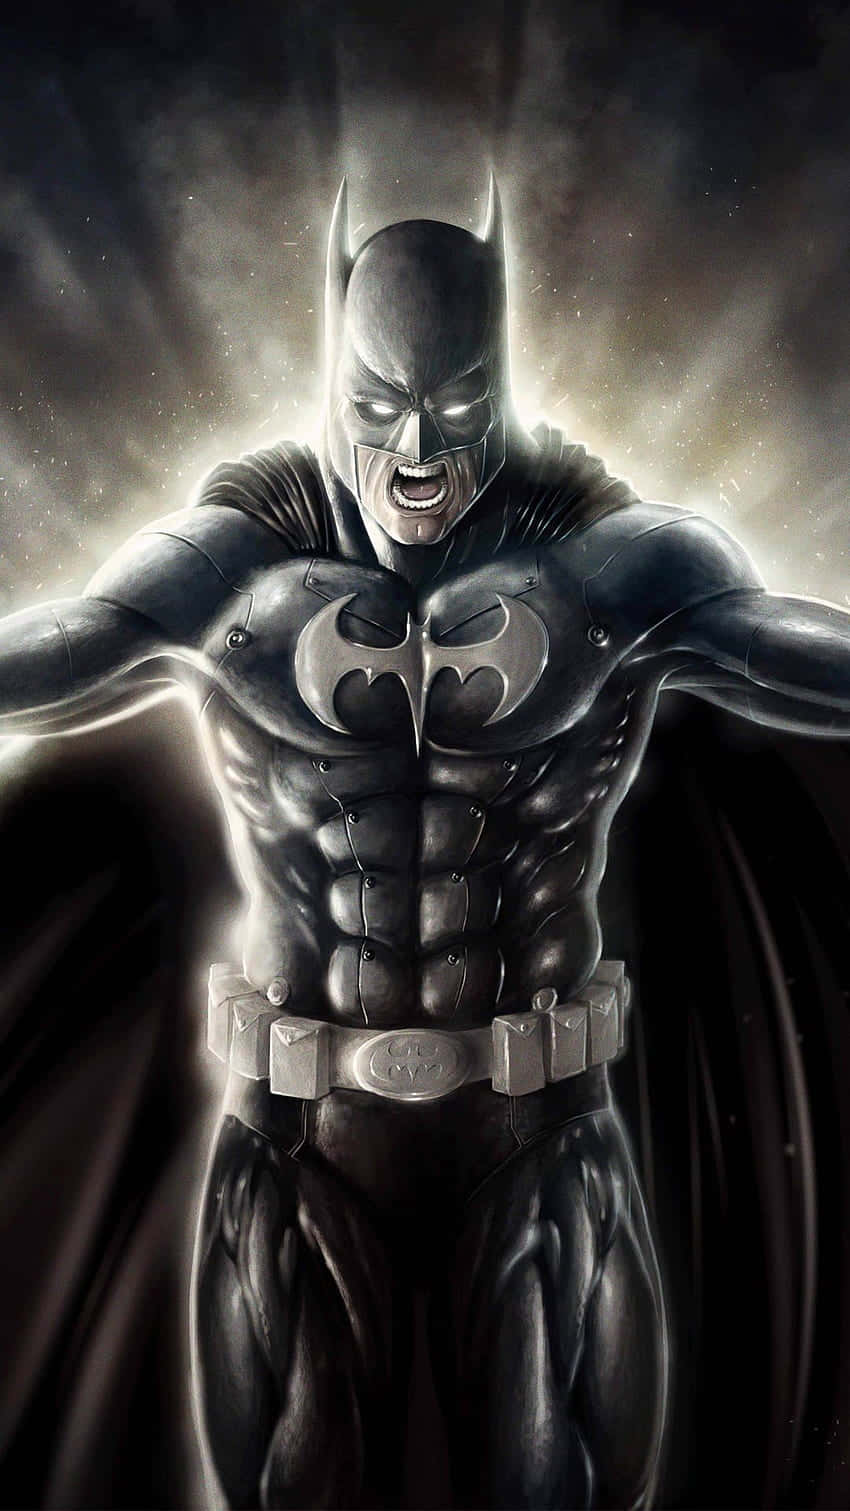 Unleash your inner superhero with the awesome Batman iPhone Wallpaper